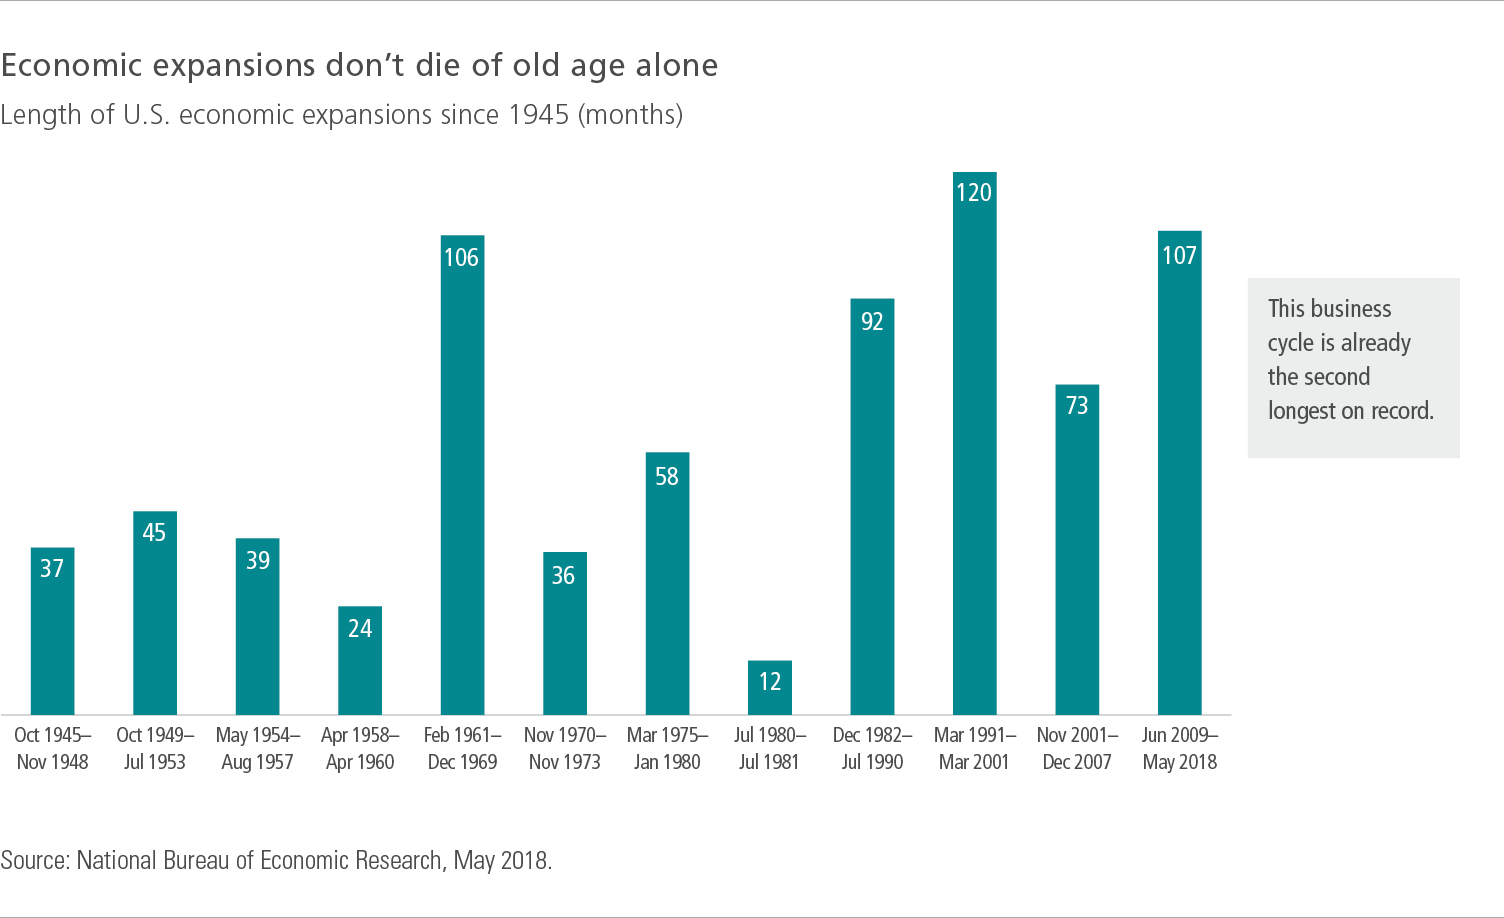 Economic expansions don't die of old age alone